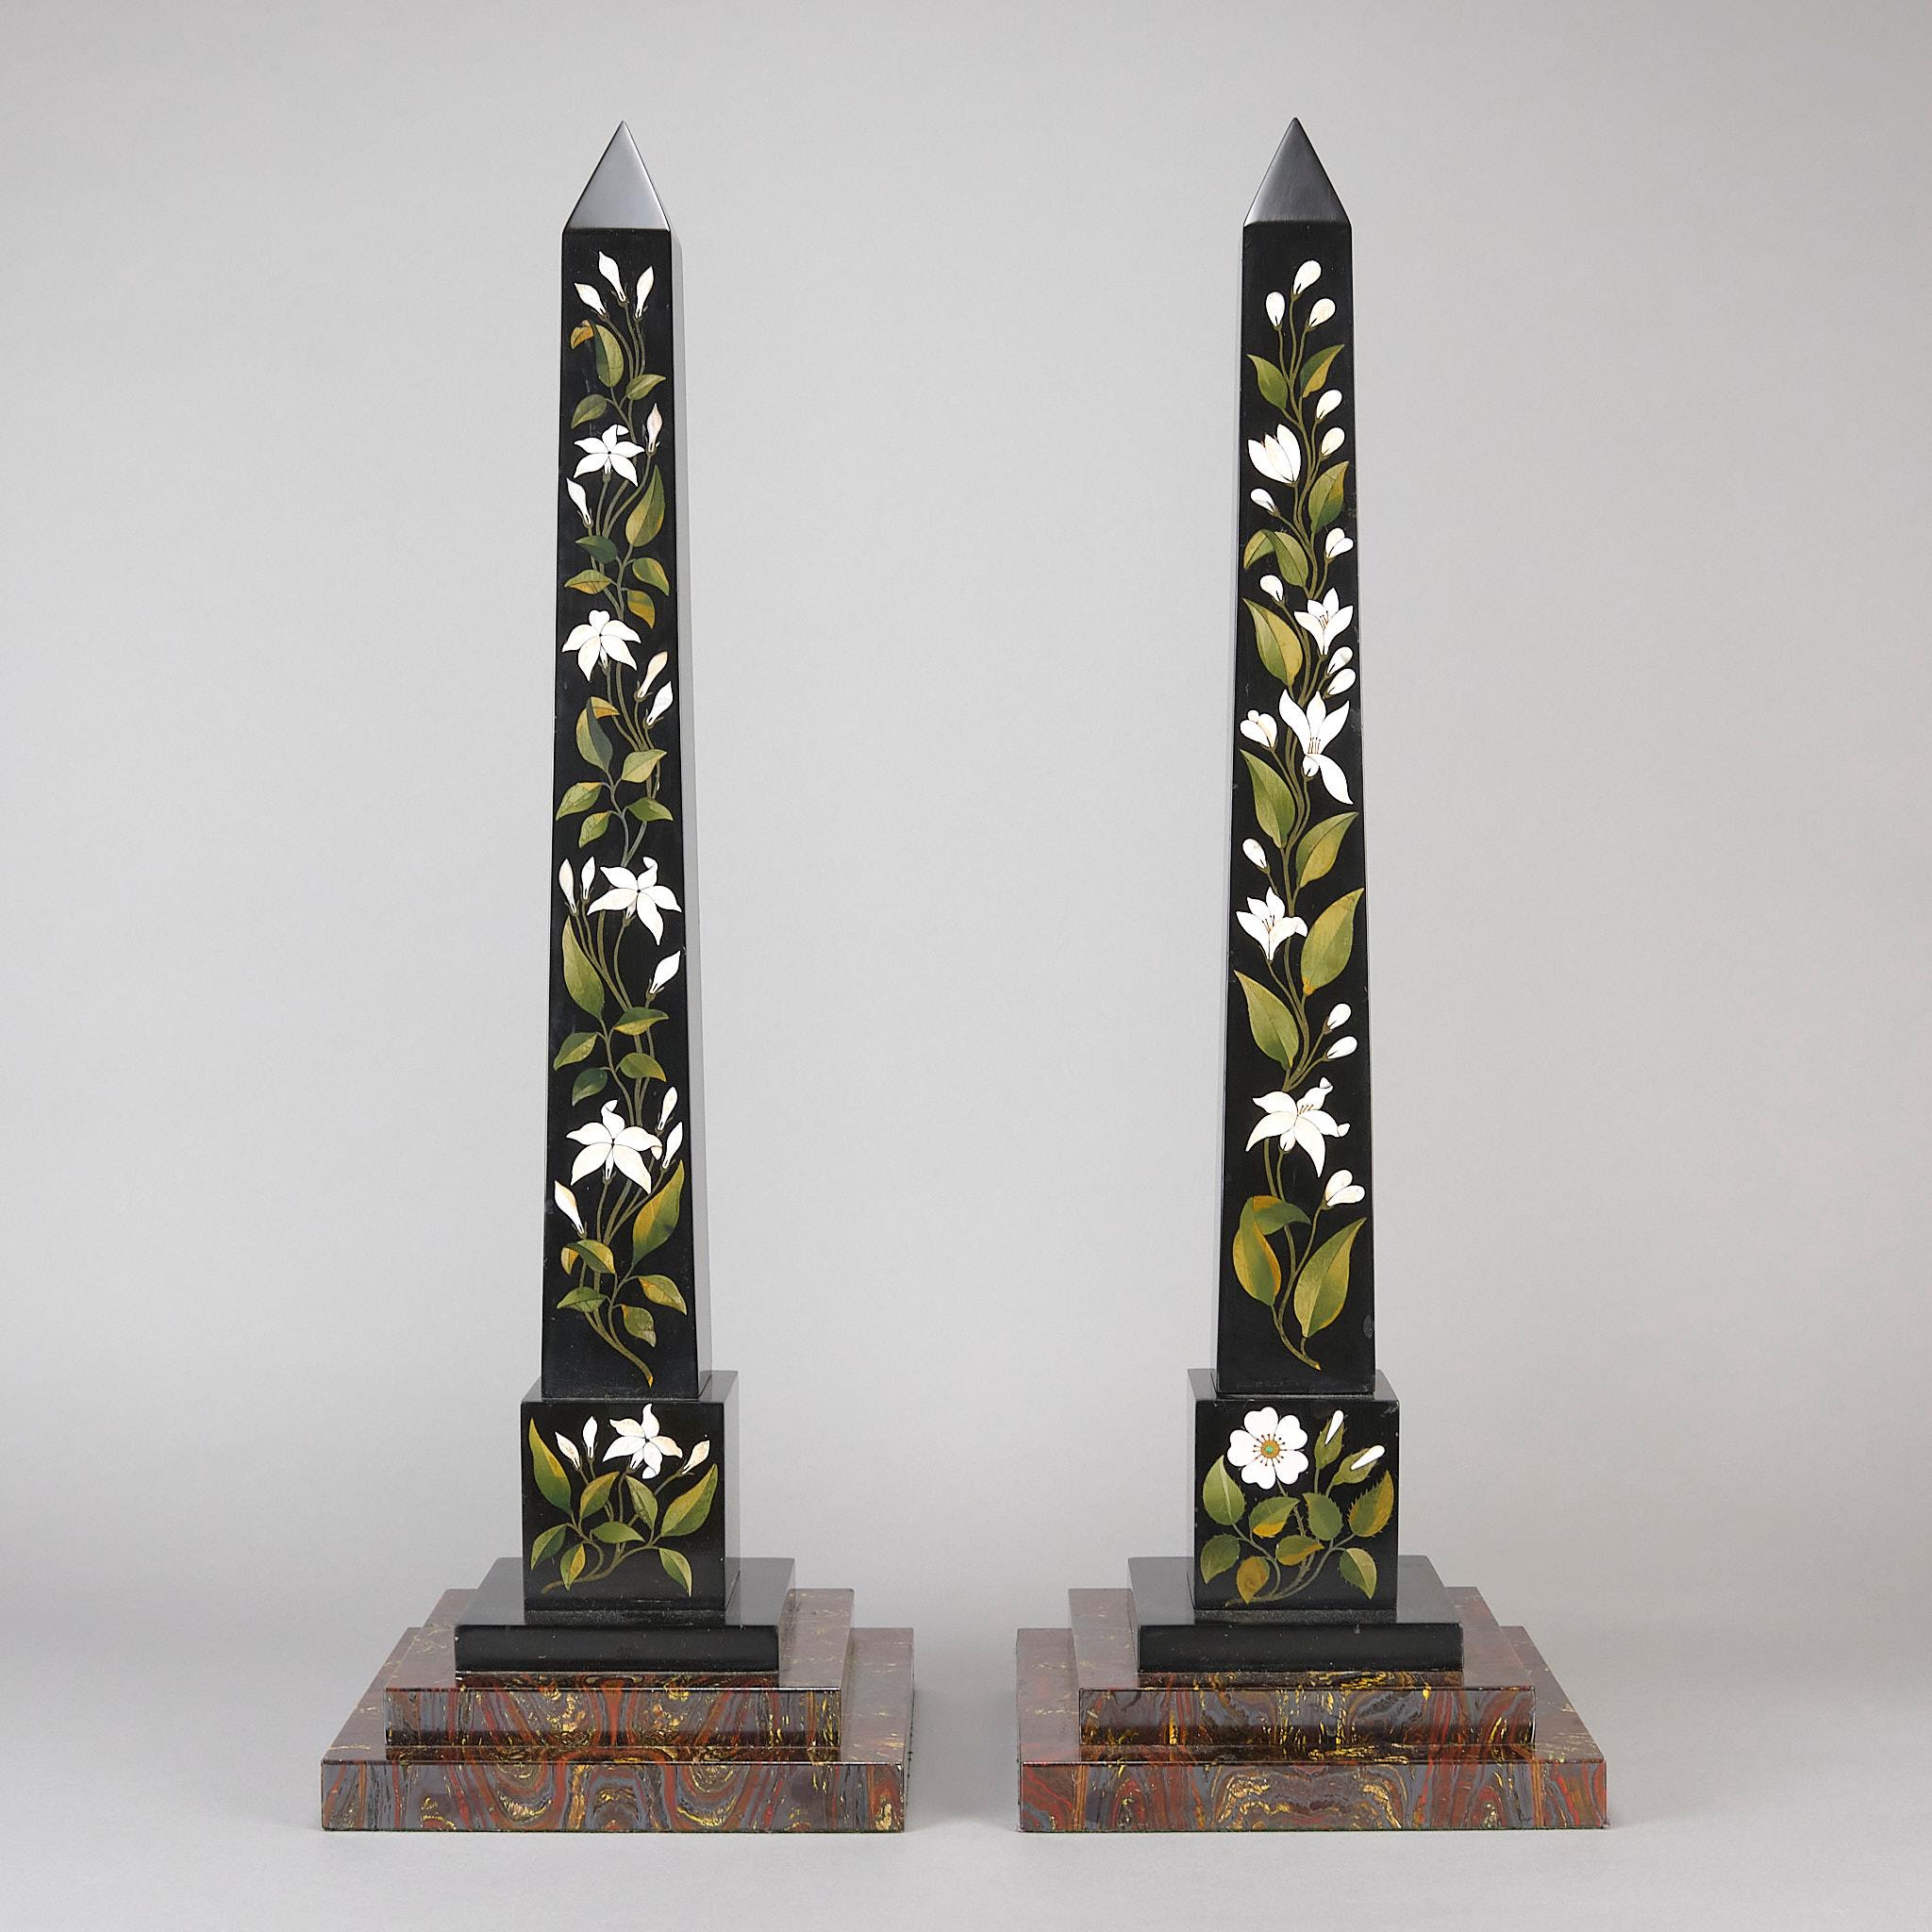 An excellent mid19th Century pair of Ashford black marble obelisks inlaid with a selection of specimen marbles applied to the front of each column in a decorative floral manner and raised on stepped spreading feet

ADDITIONAL INFORMATION
Height:    